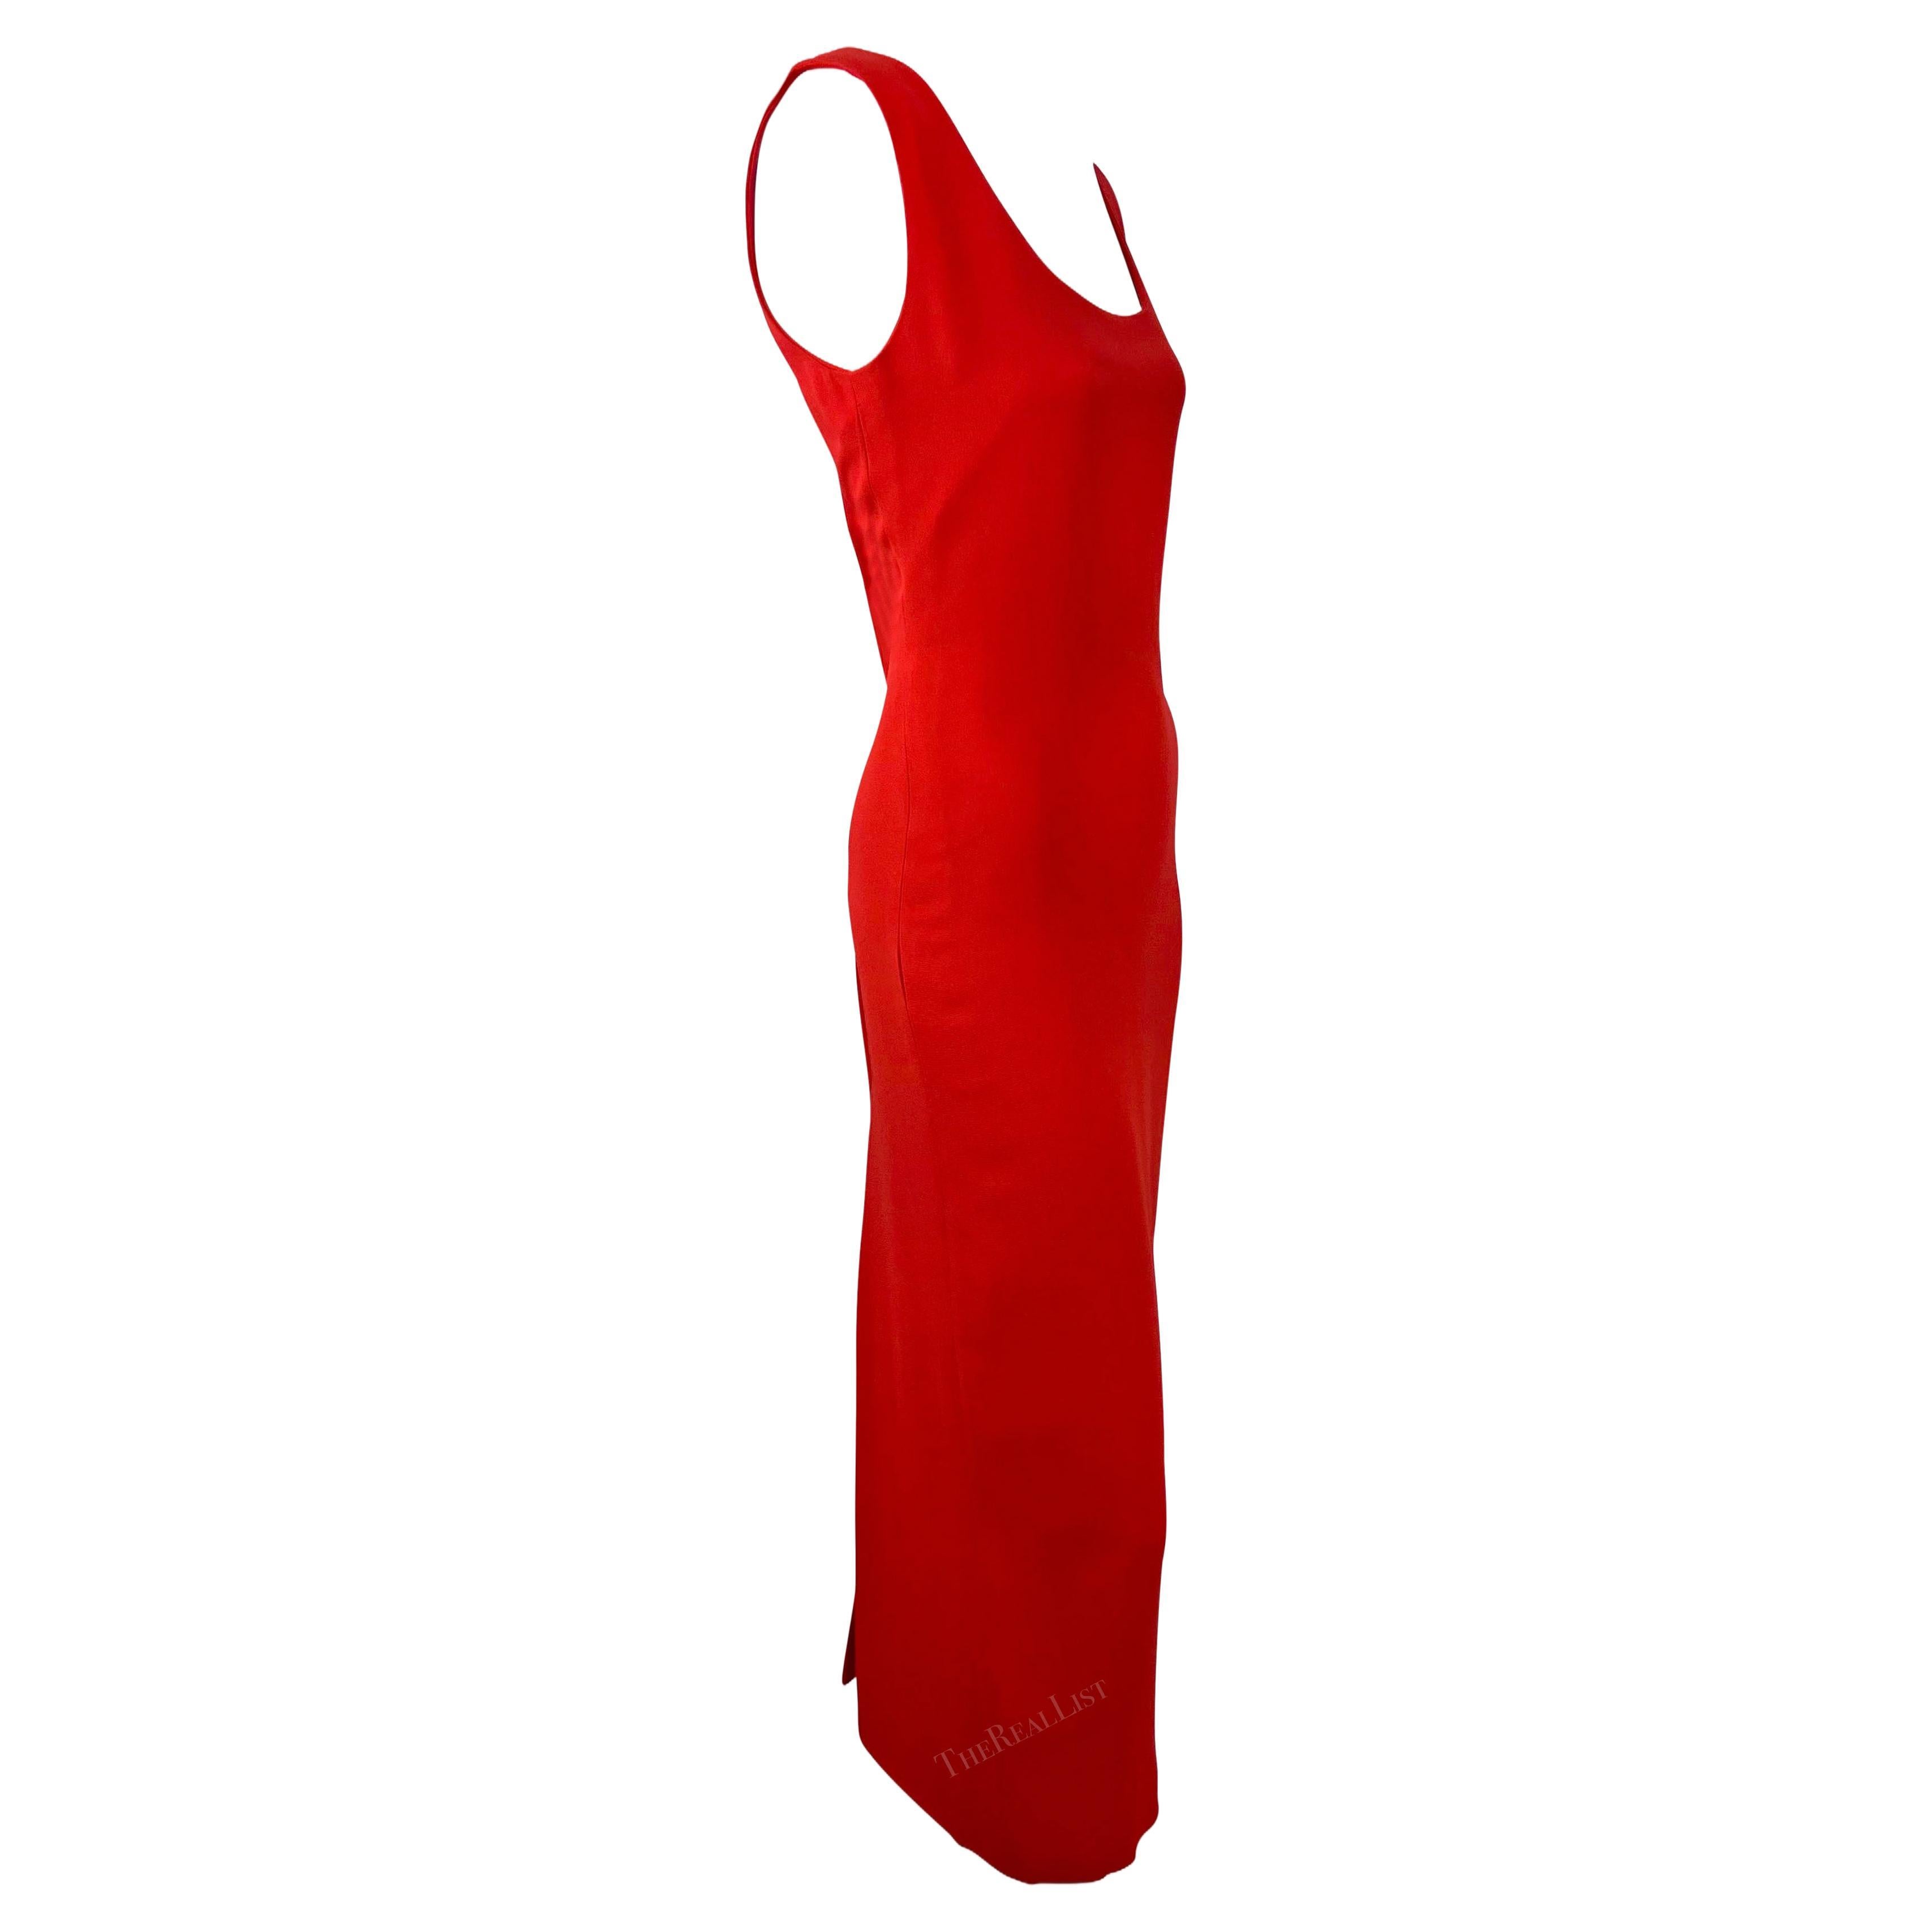 S/S 1993 Gianni Versace Runway Ad Red Plunging Back Sleeveless Dress For Sale 6